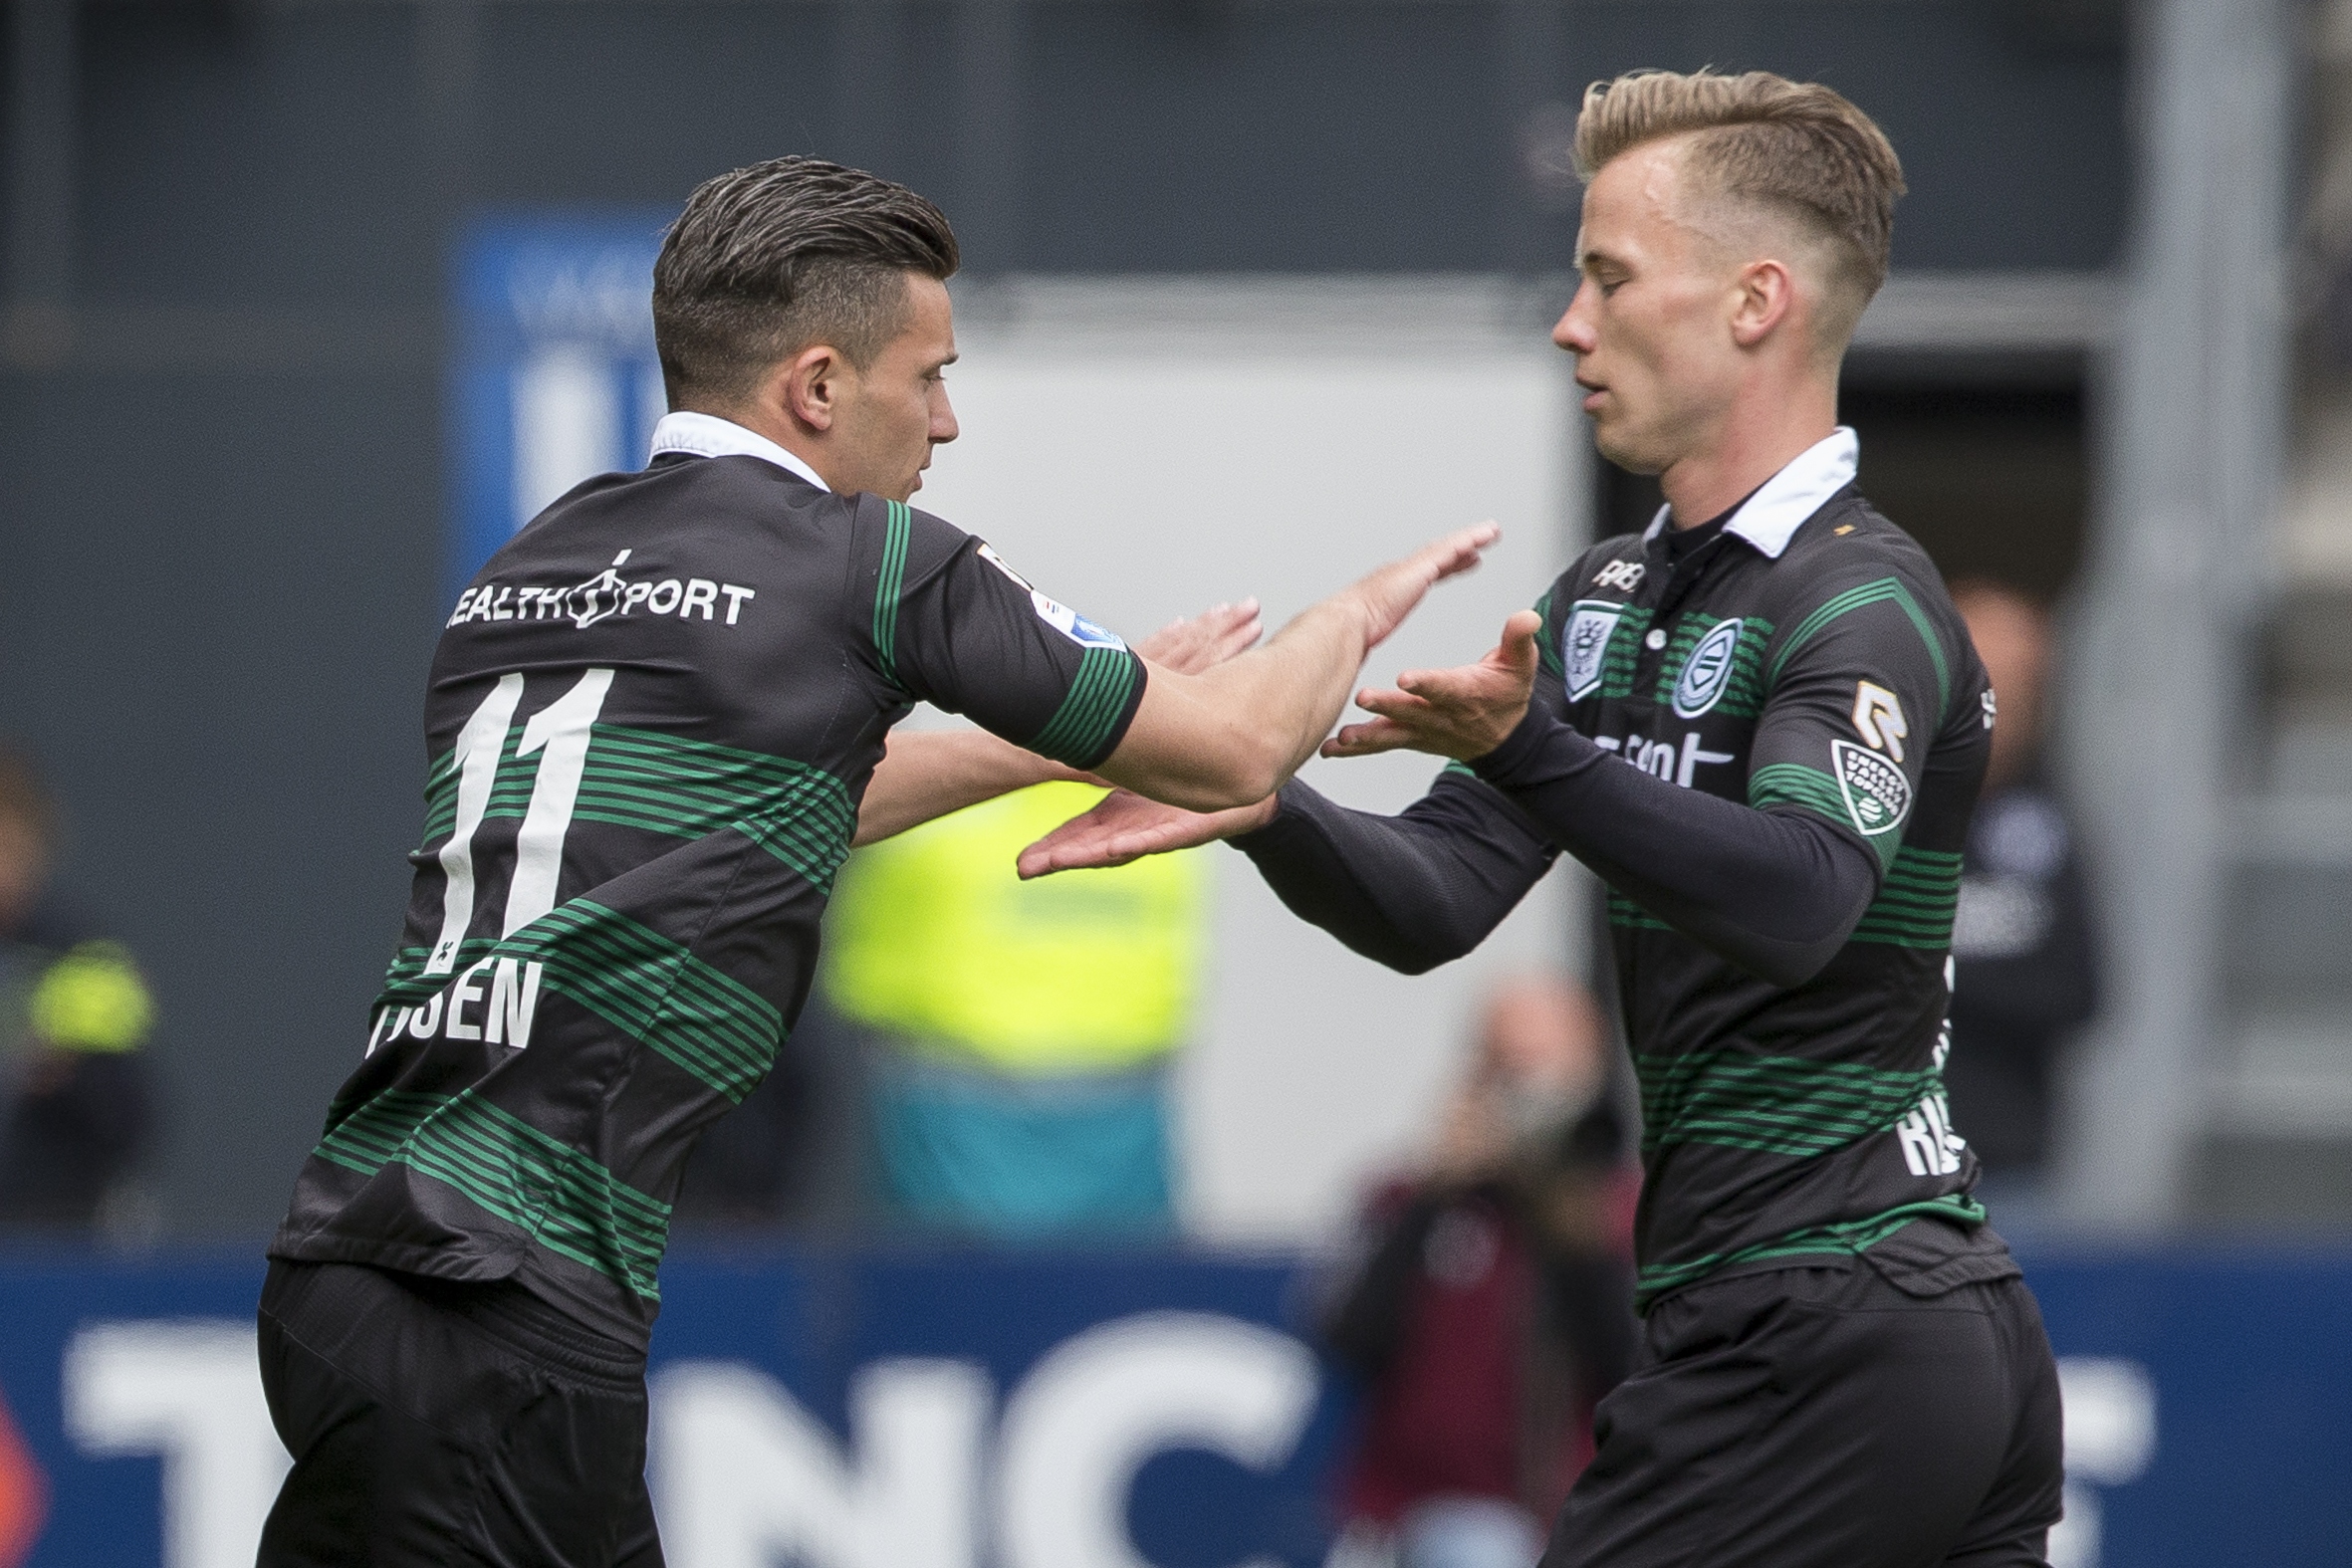 Europa League Play-offs - 'Heracles Almelo v FC Groningen'